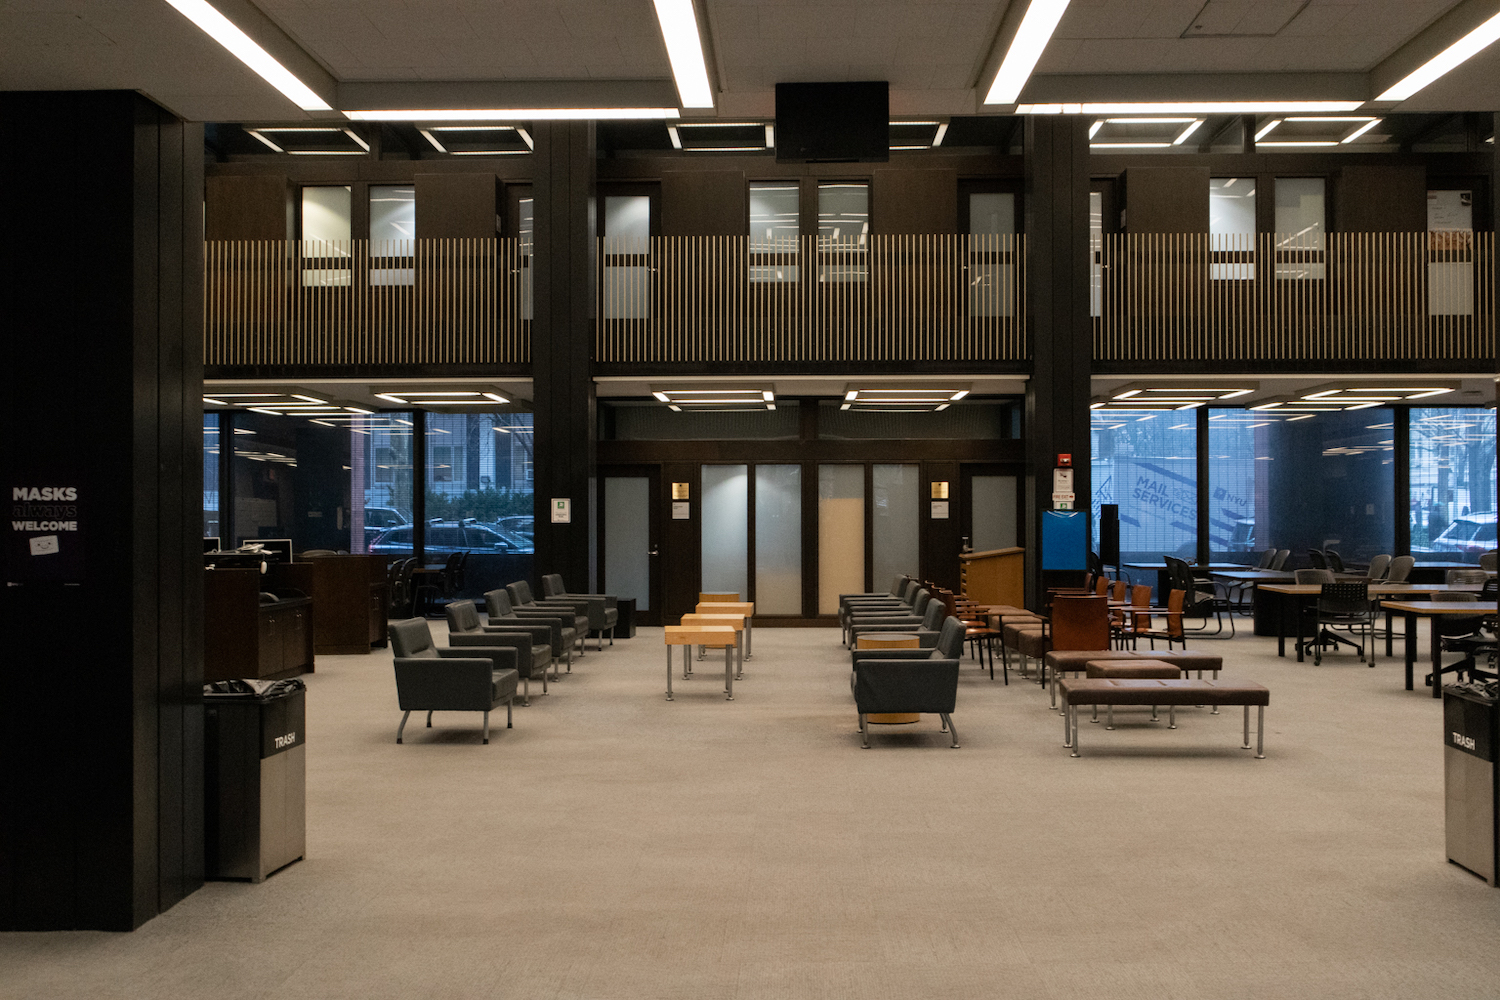 The first floor of Bobst Library, lined with armchairs, benches, tables and windows in the back.